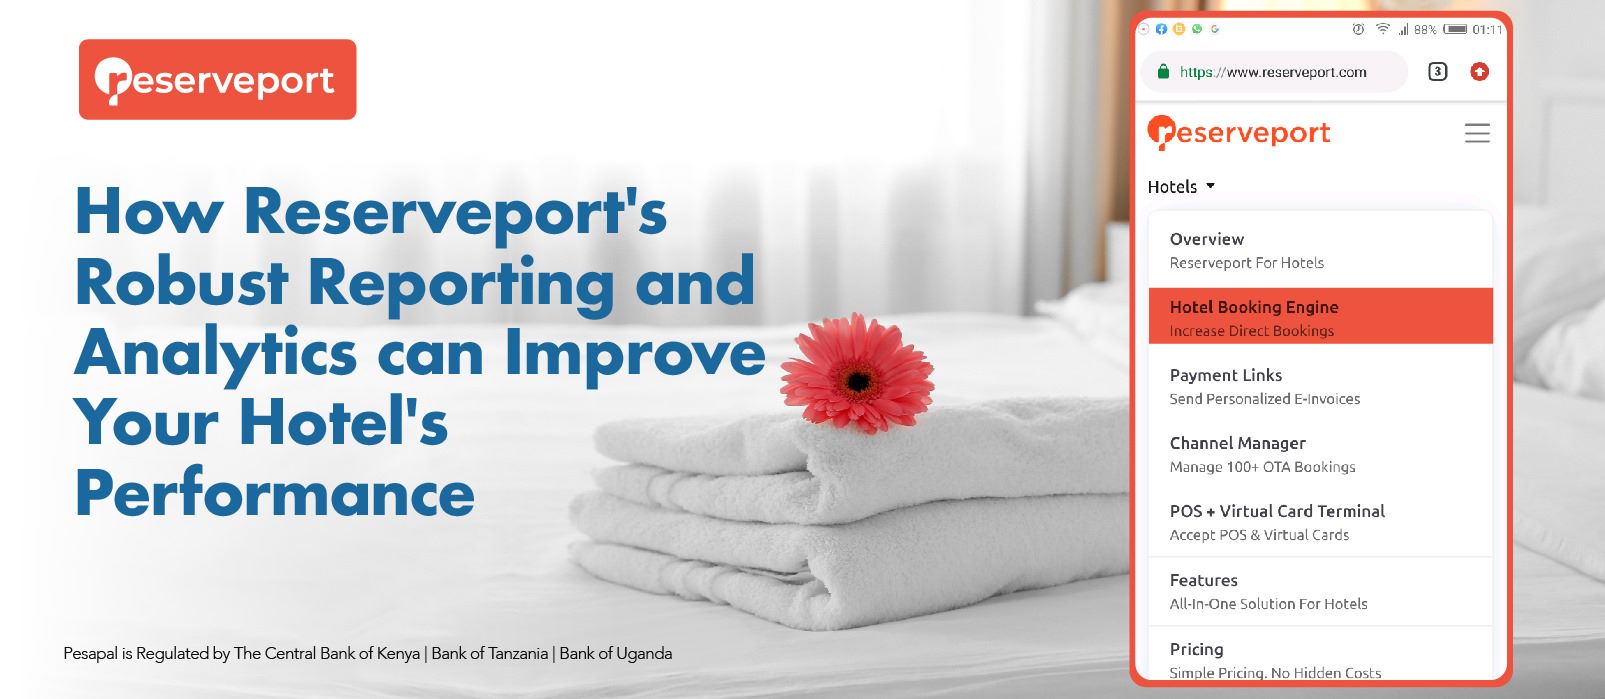 How Reserveport's Robust Reporting and Analytics Can Improve Your Hotel's Performance